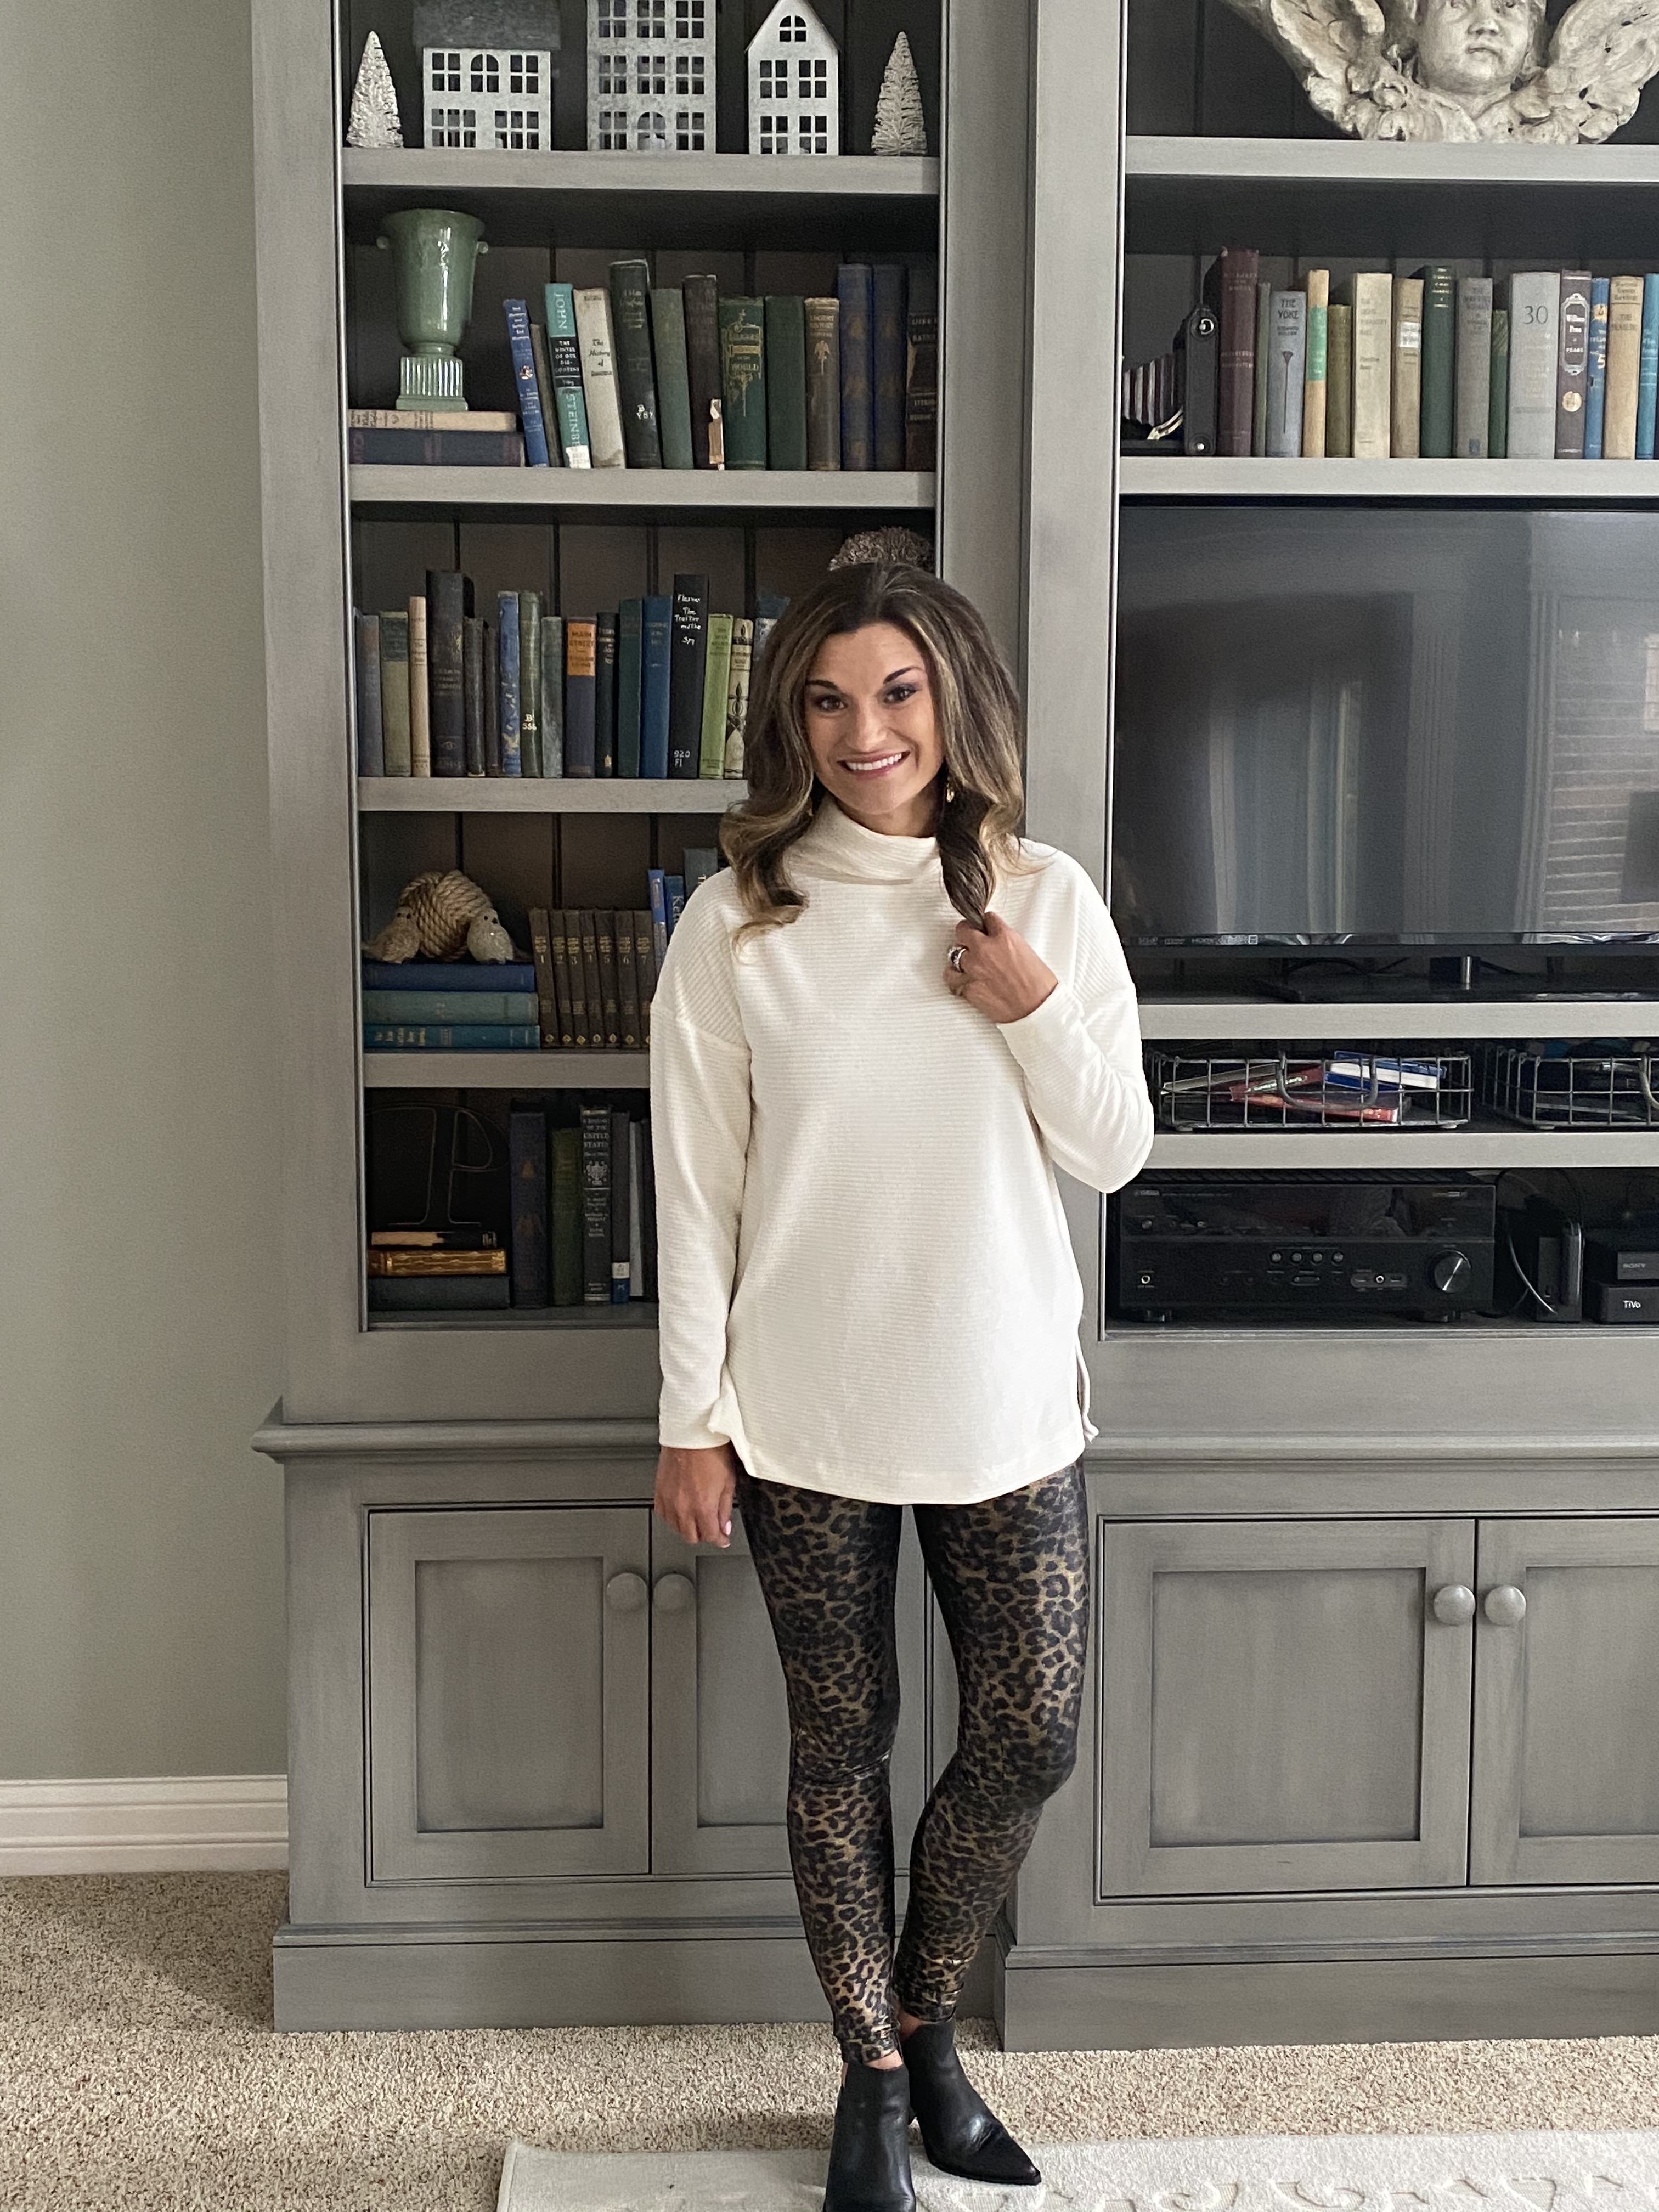 College Prep  Black tights outfit, How to style tights, Leopard dress